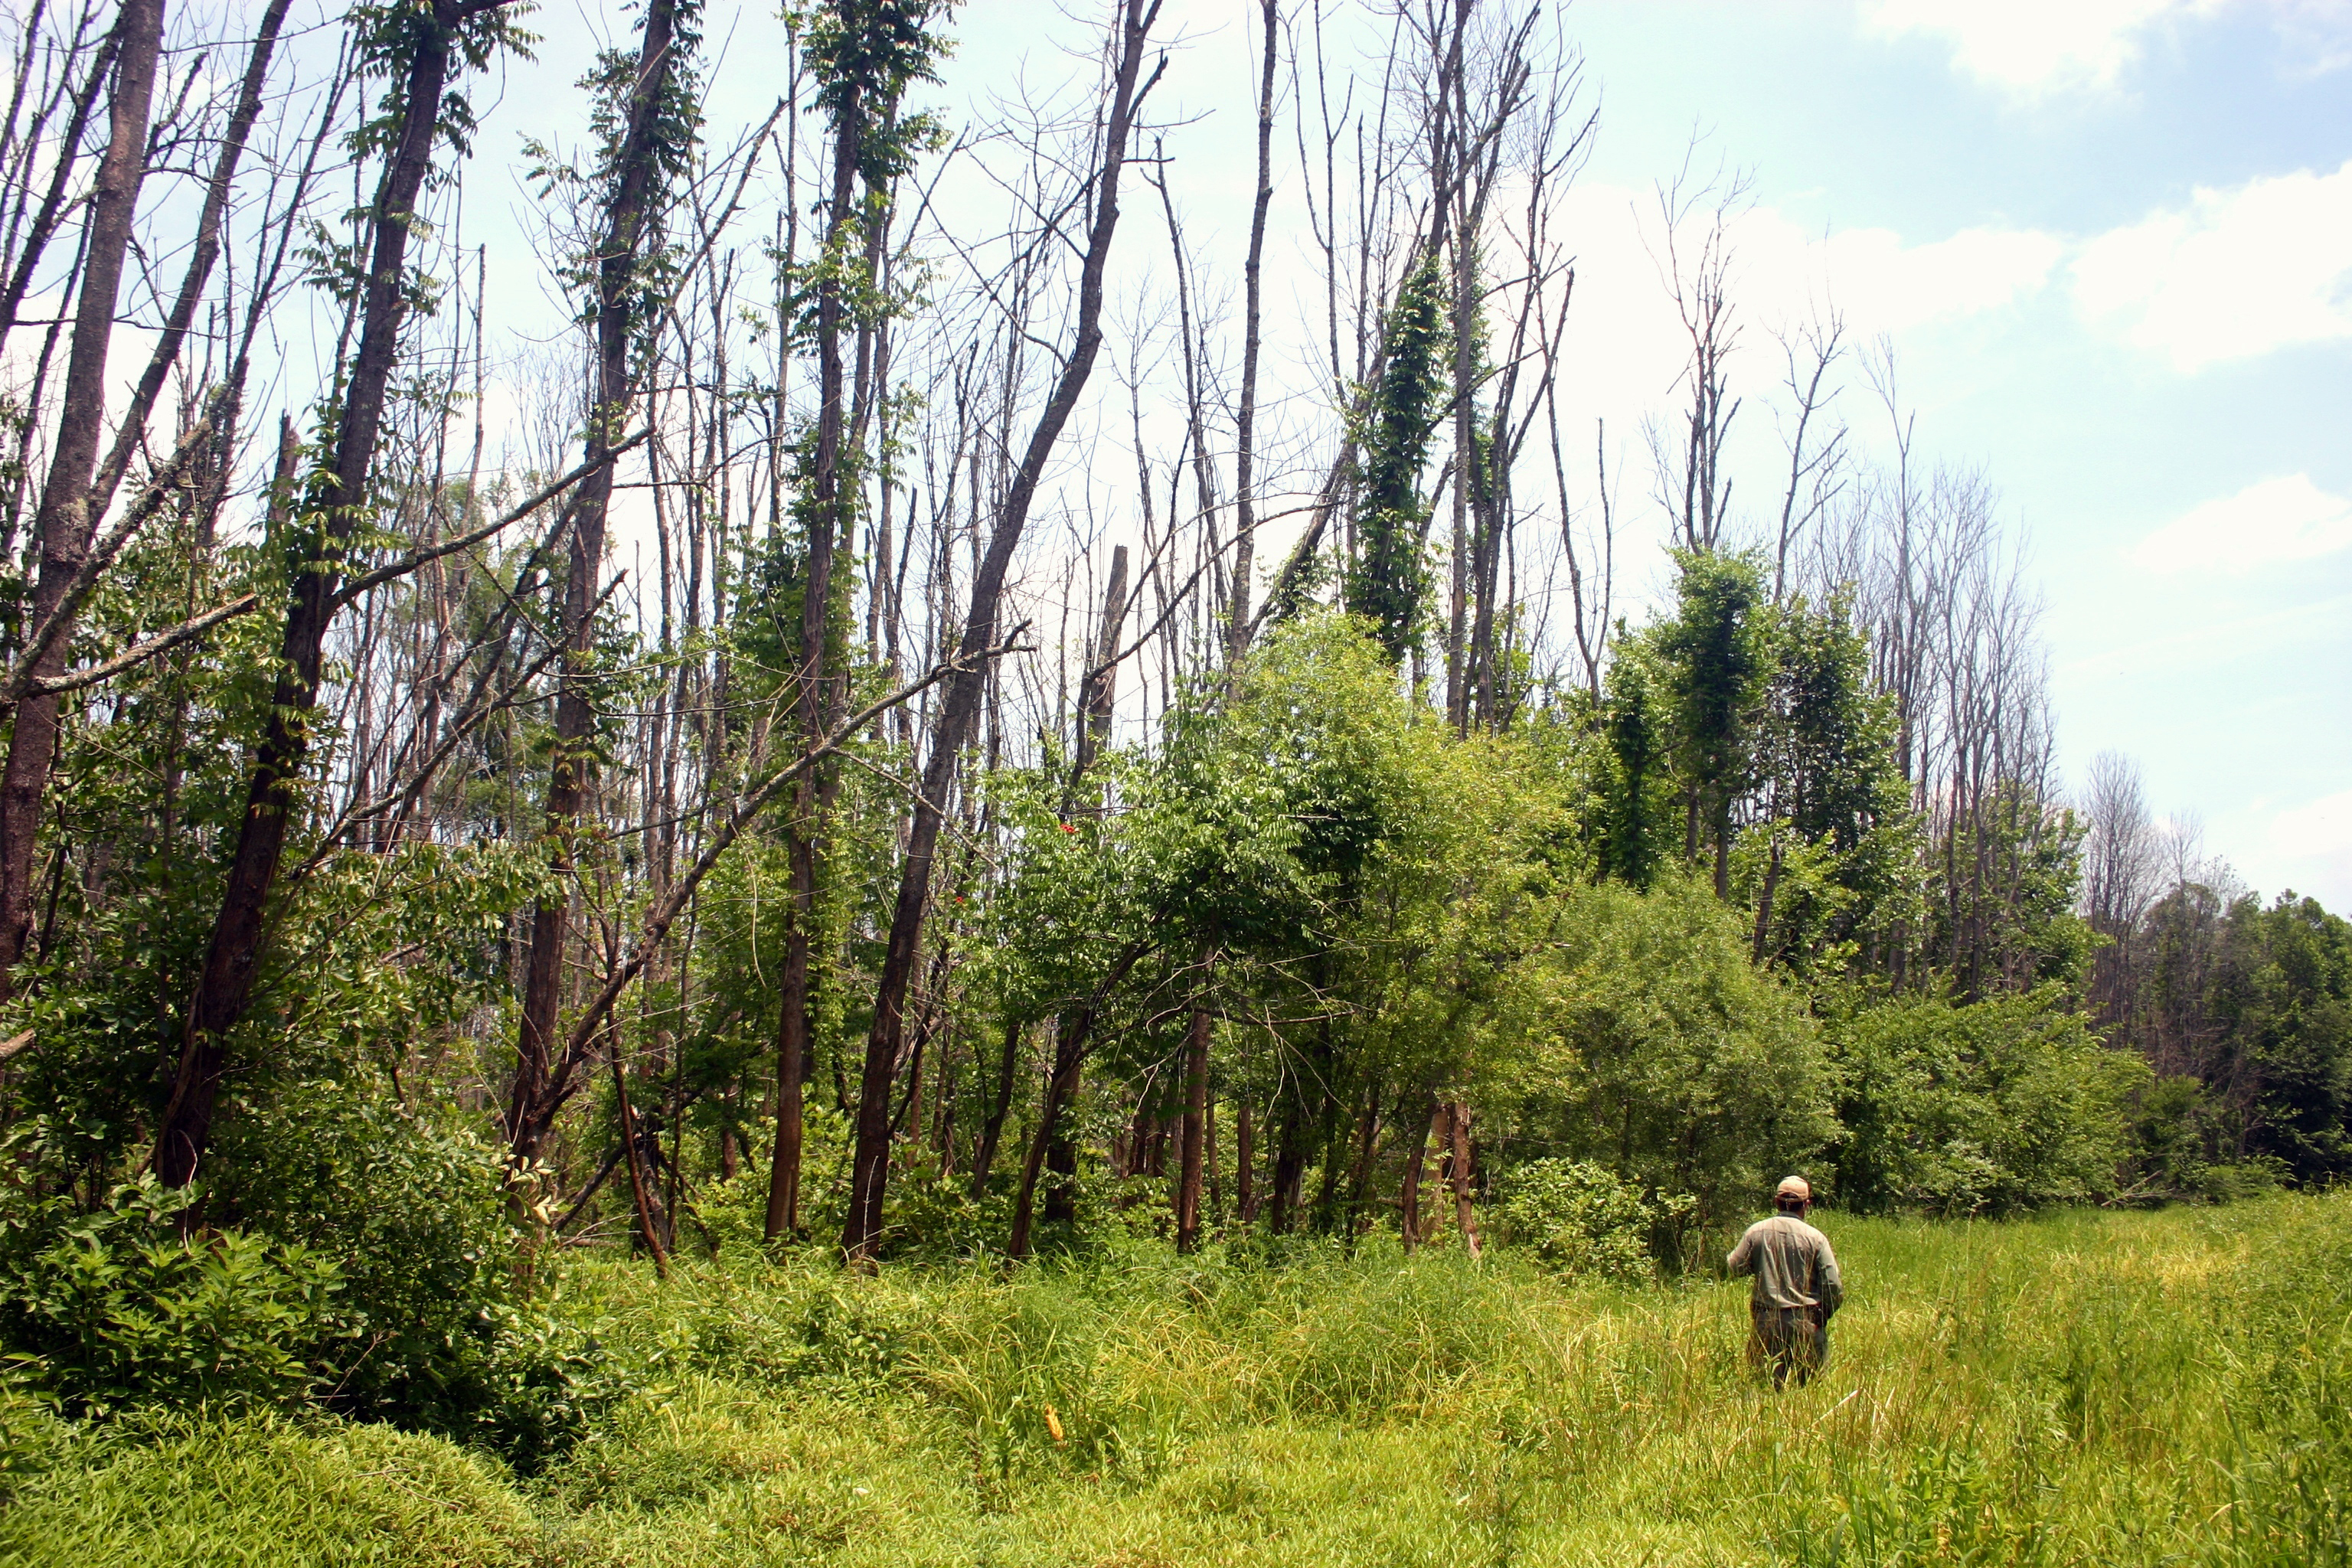 A forest scene showing trees stripped of vegetation.